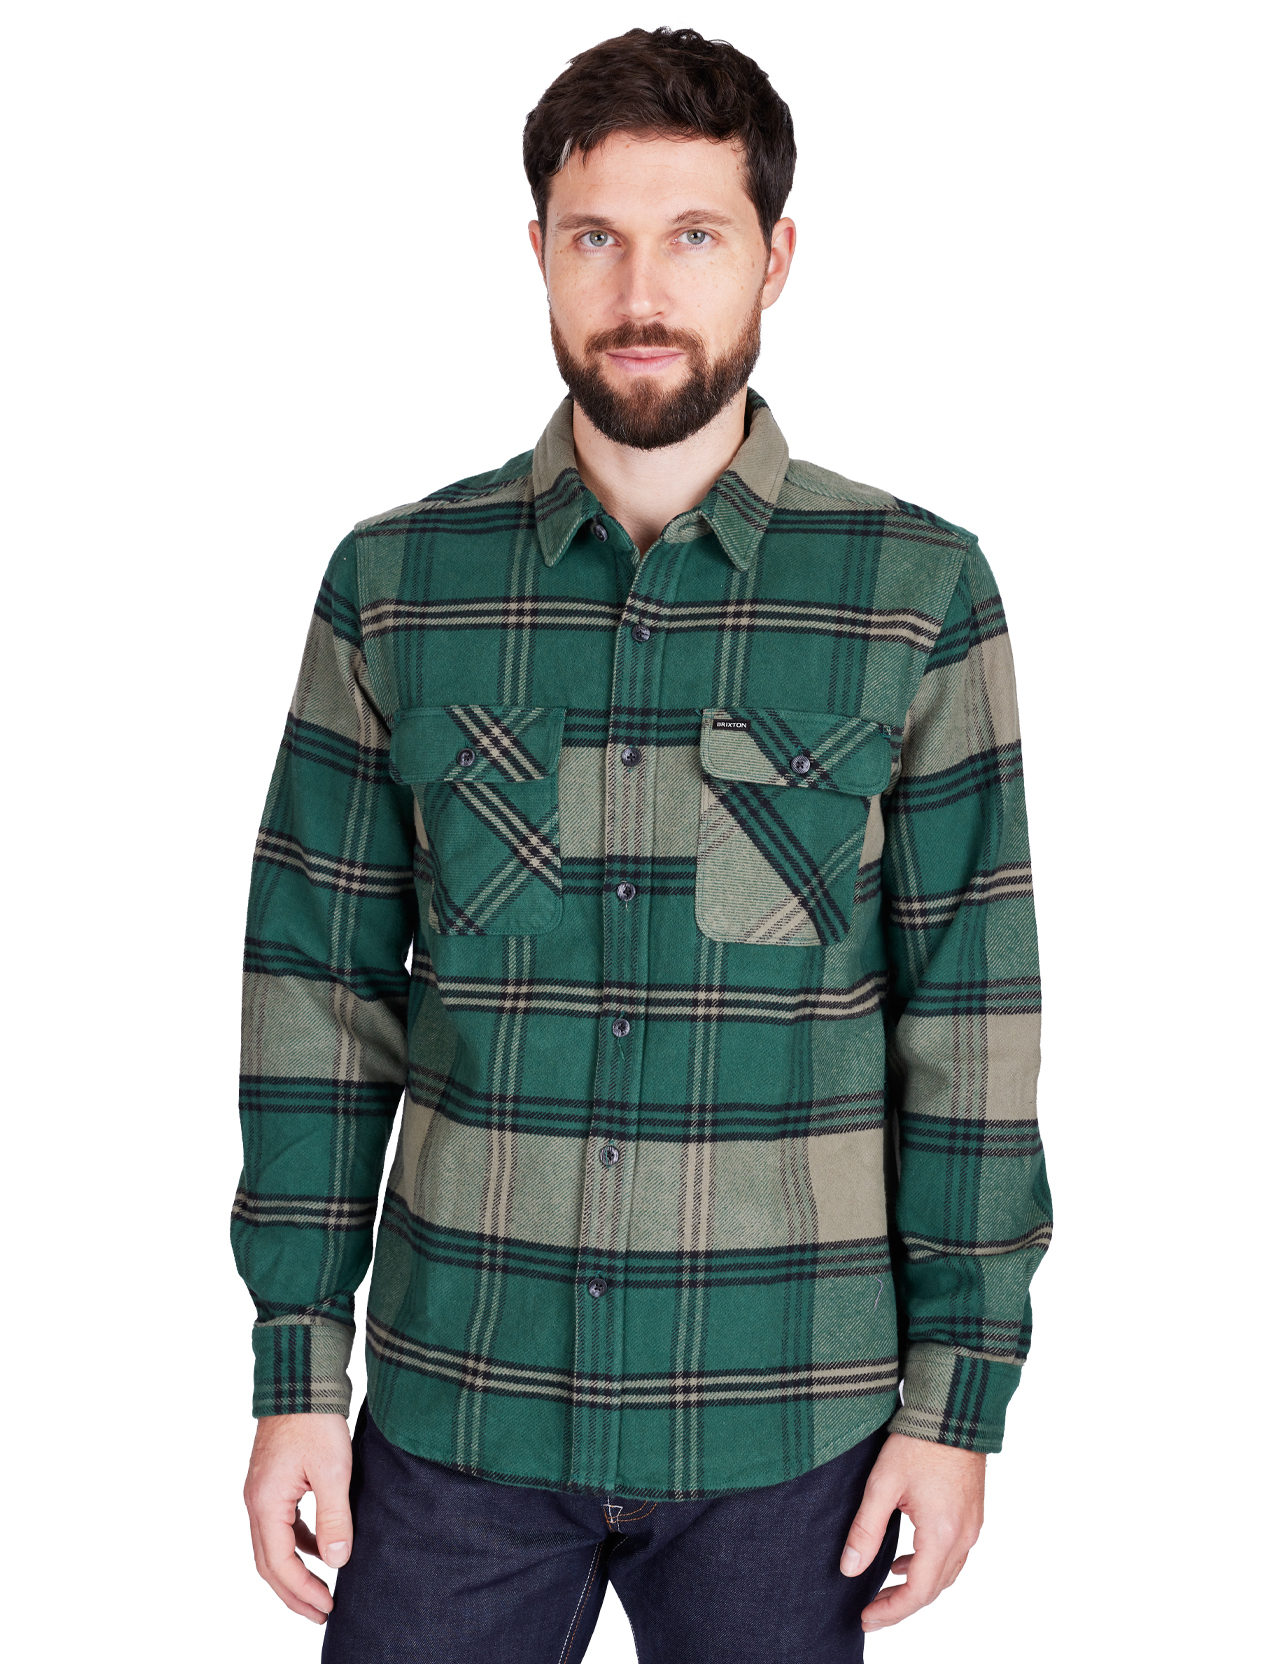 Brixton - Bowery Heavy Weight Flannel - Pine Needle/Olive Surplus